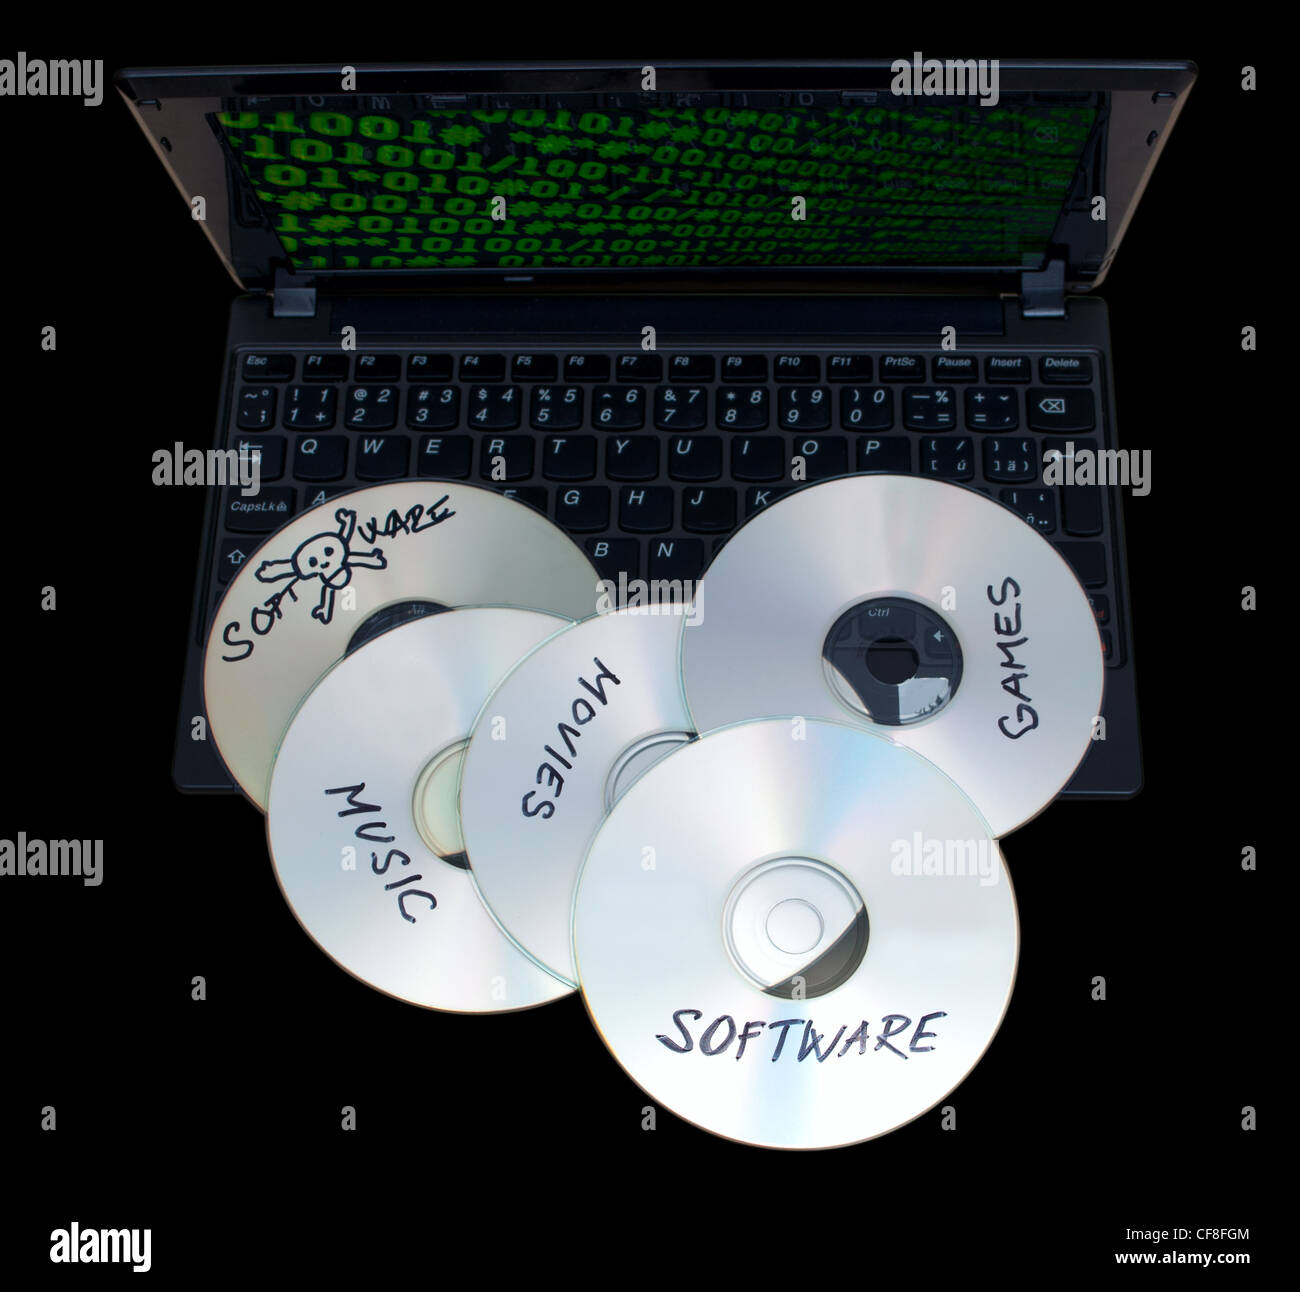 Piracy Concept - Burnt CDs With Illegal Software on Keyboard of Notebook - Isolated on Black Background Stock Photo